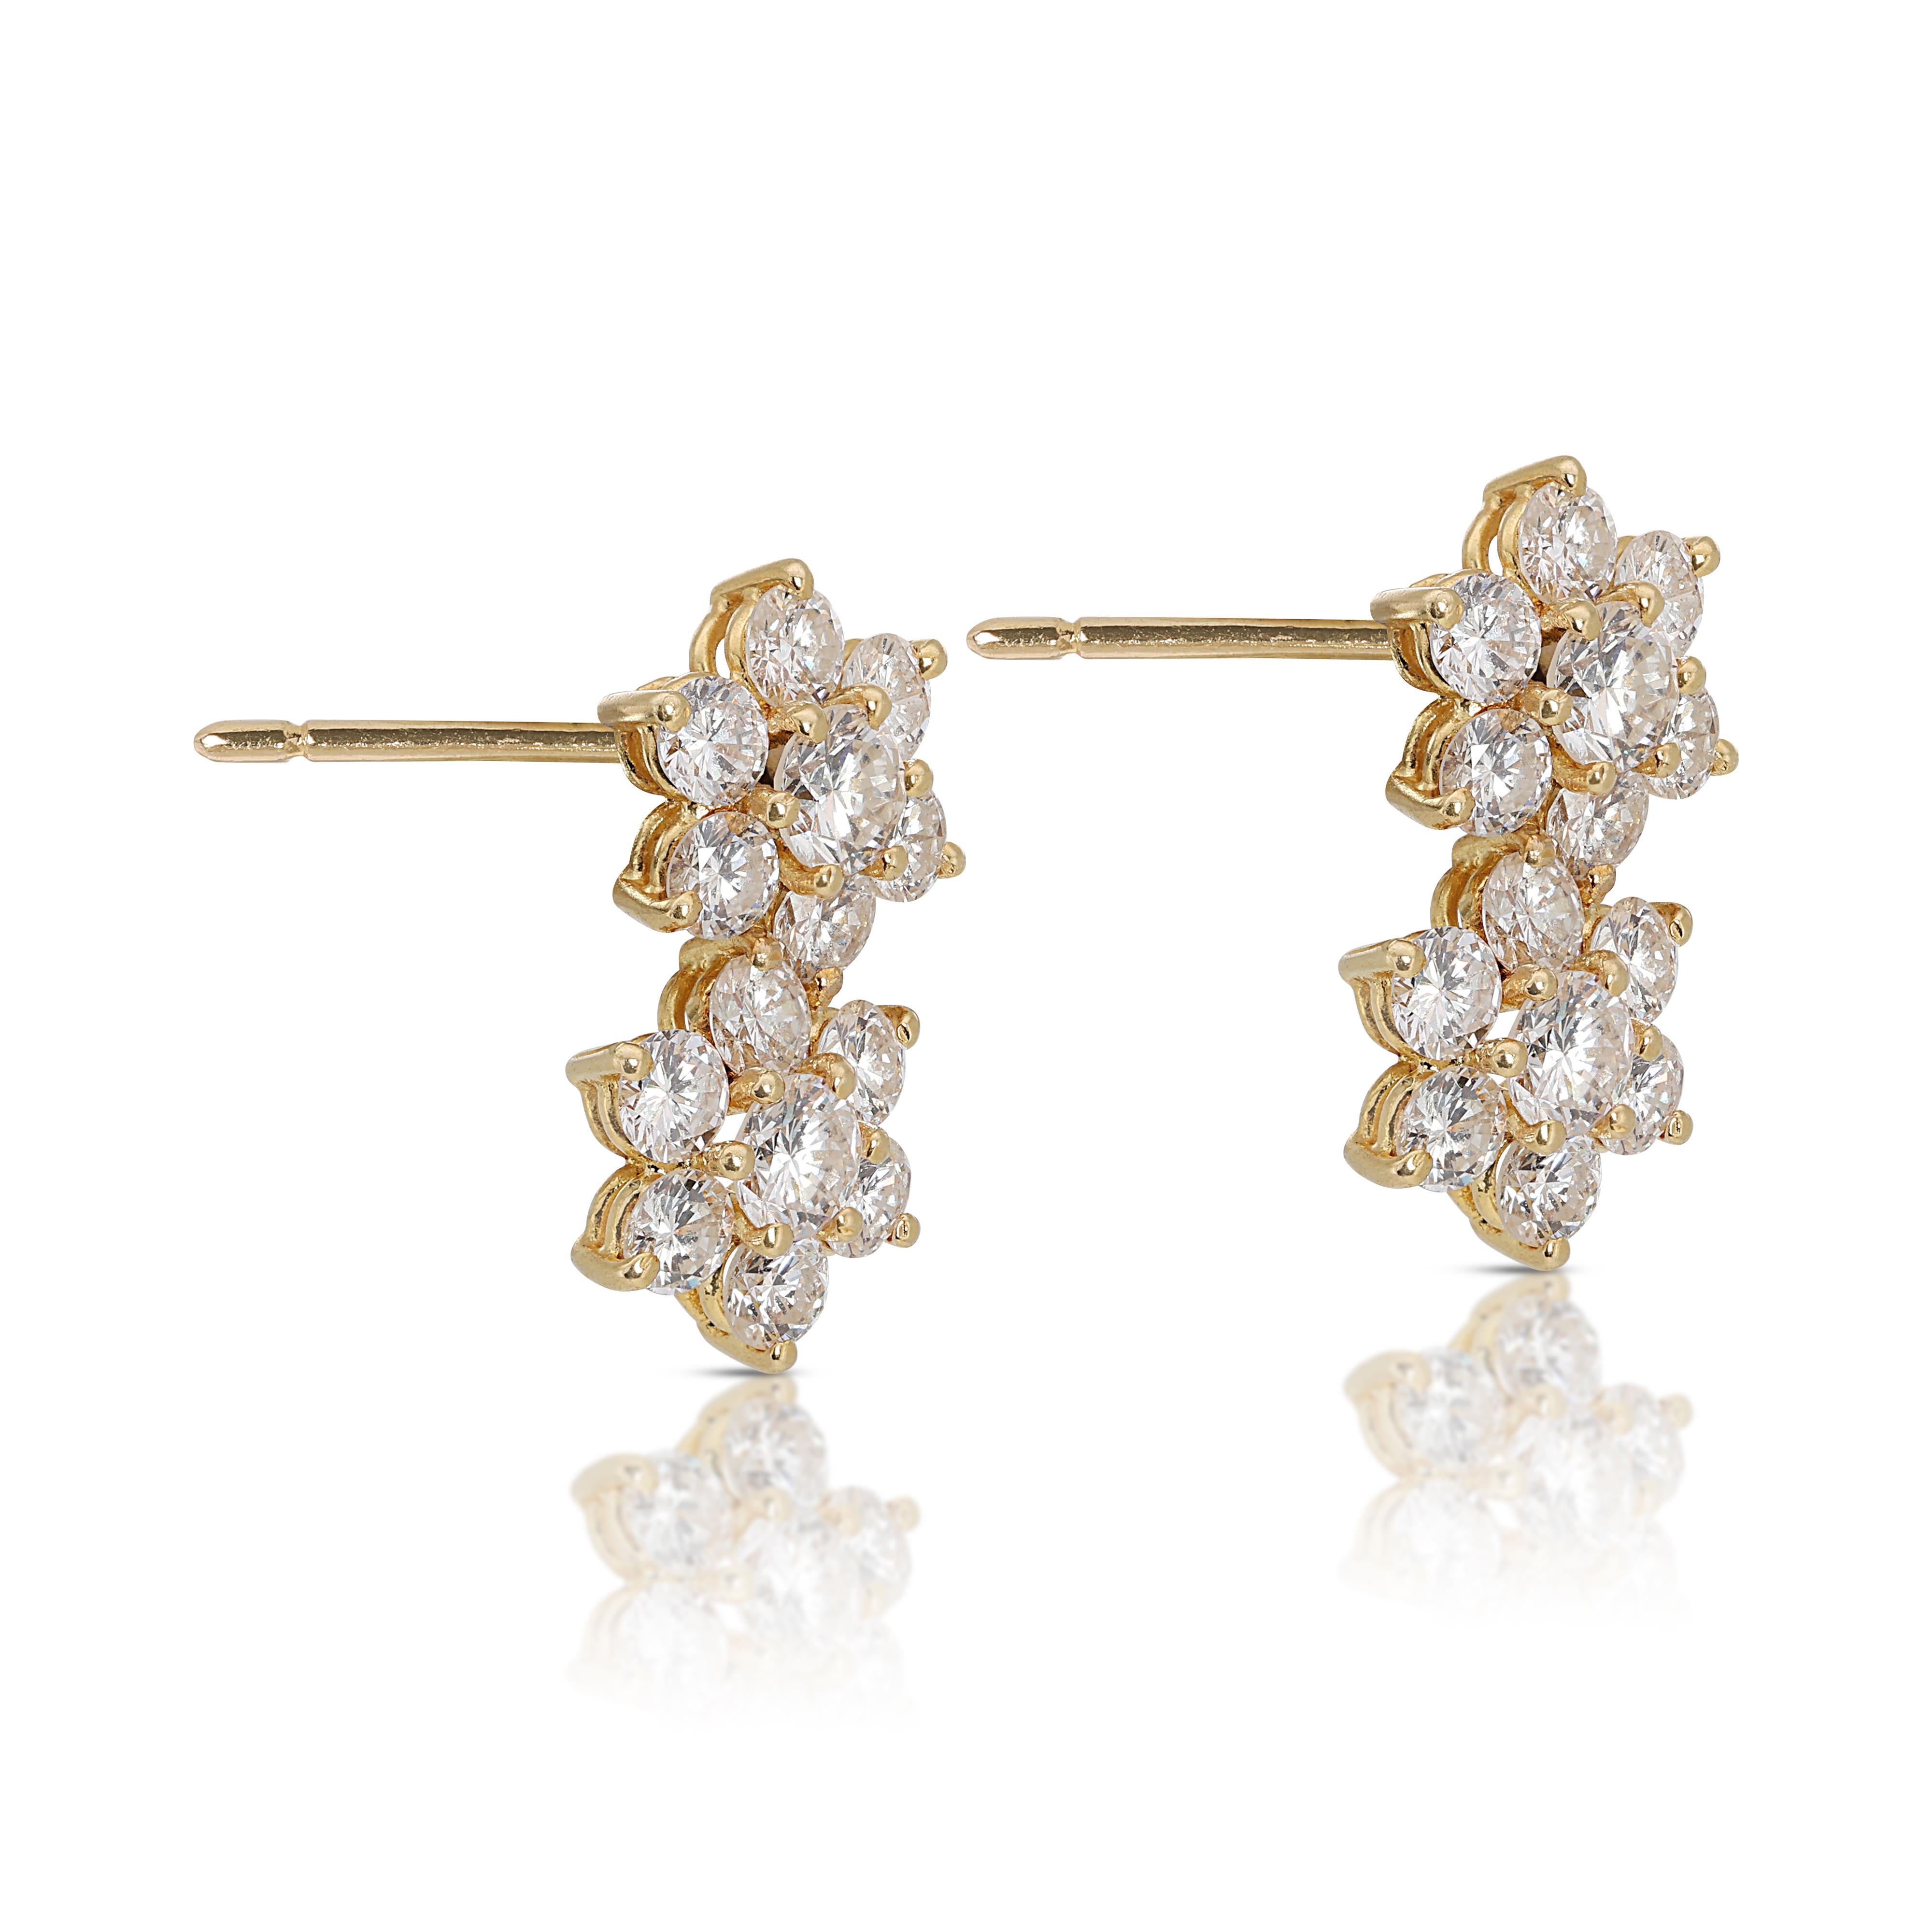 Dazzle everyone with these stunning 18k yellow gold earrings featuring 28 sparkling round brilliant diamonds with a total carat weight of 1.52ct. These captivating diamonds boast a G color grade and VS clarity, ensuring exceptional brilliance. The